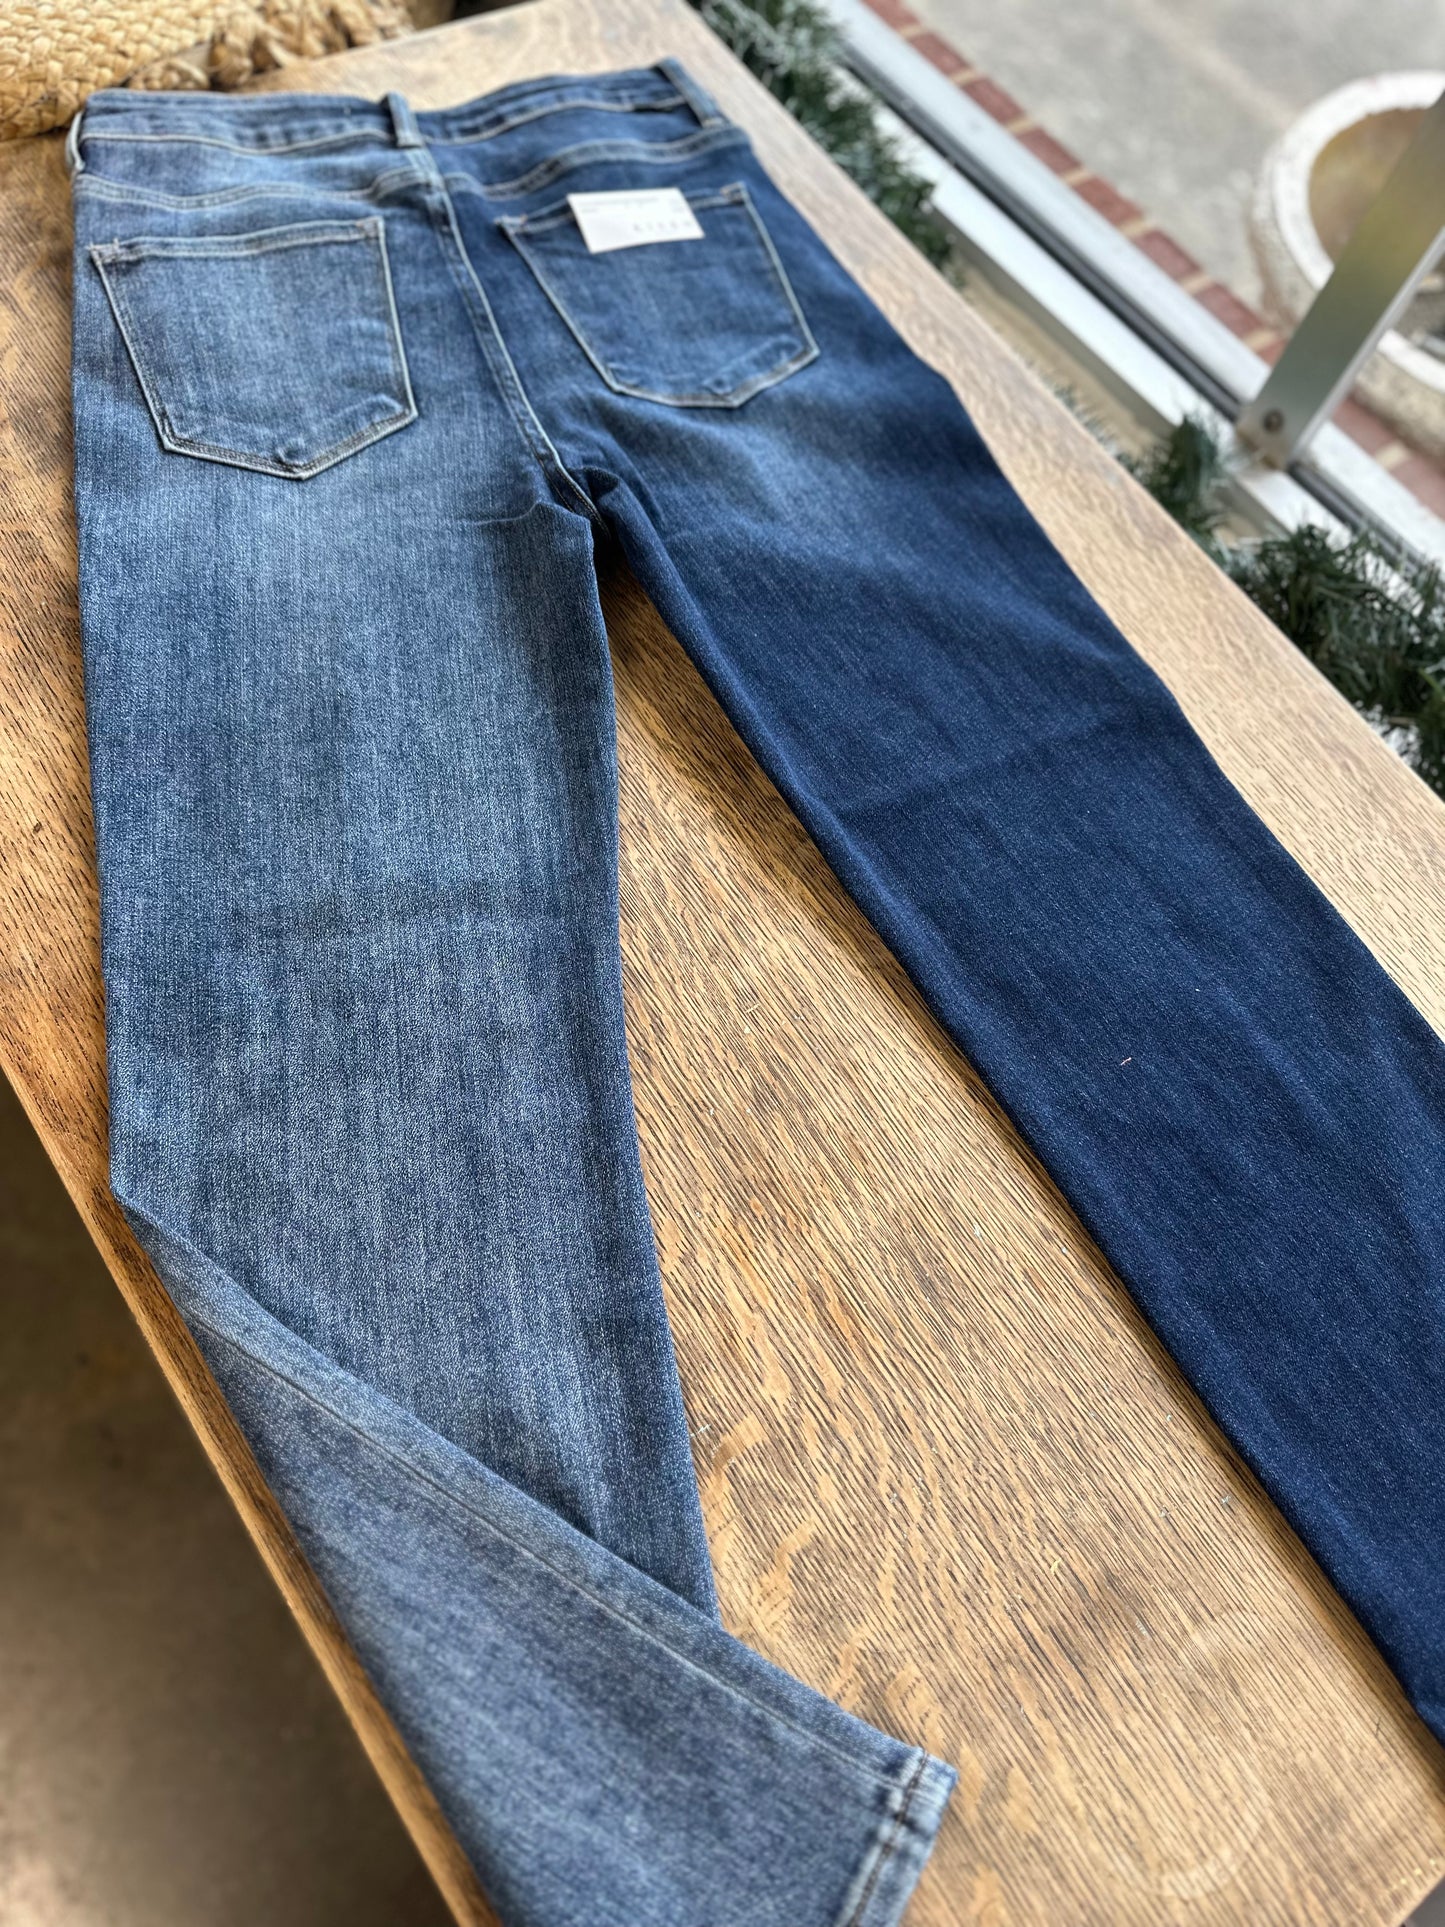 Risen two toned jeans